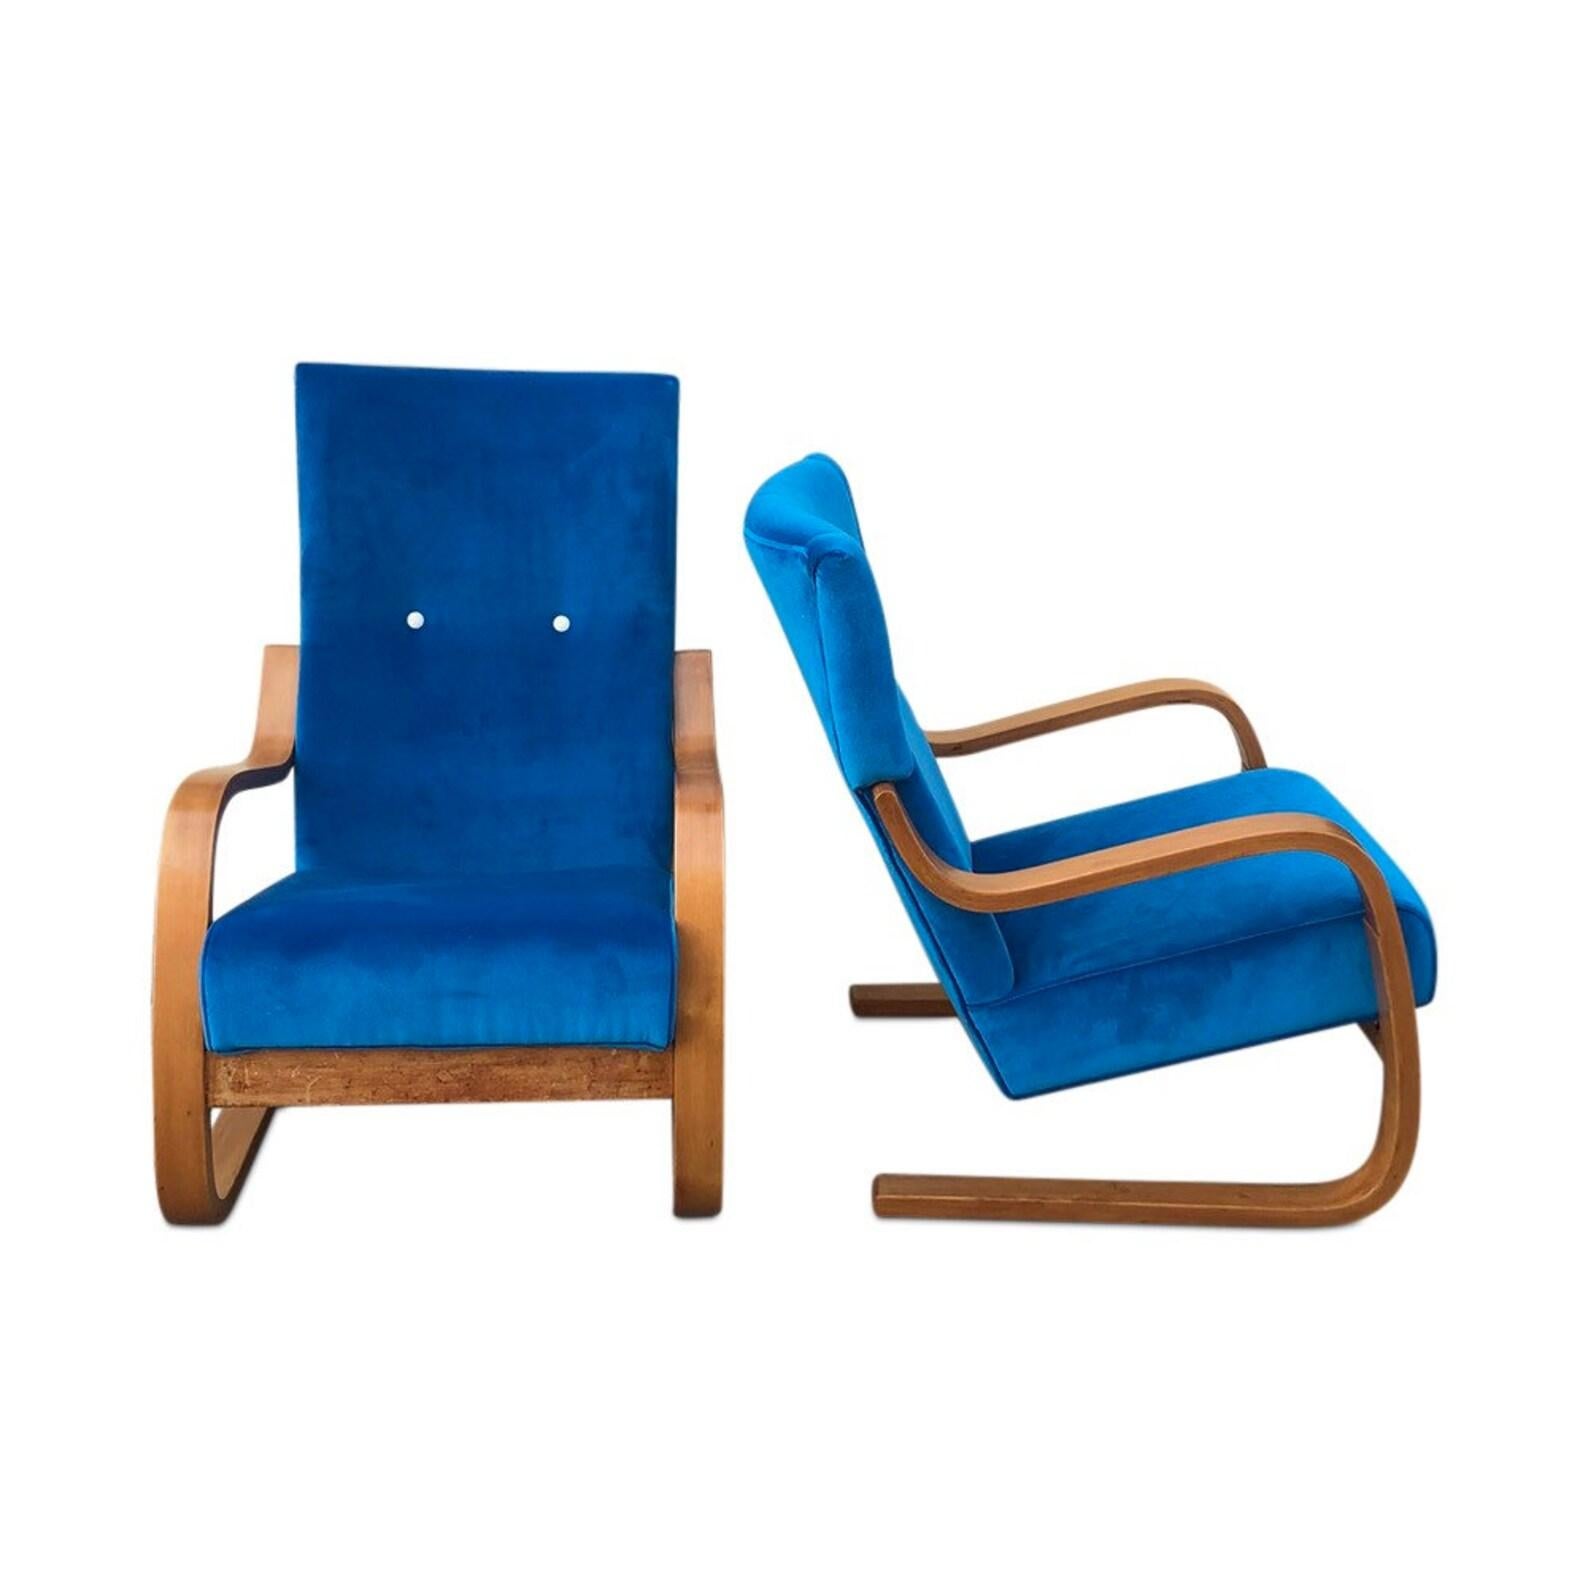 Curated Pair of original, vintage chairs by the acclaimed Finnish designer and architect Alvar Aalto. The cantileverd wood frame with new real holly hunt bright blue velvet seat and back. Armchairs, bergere chairs, chairs, chaise longues, club